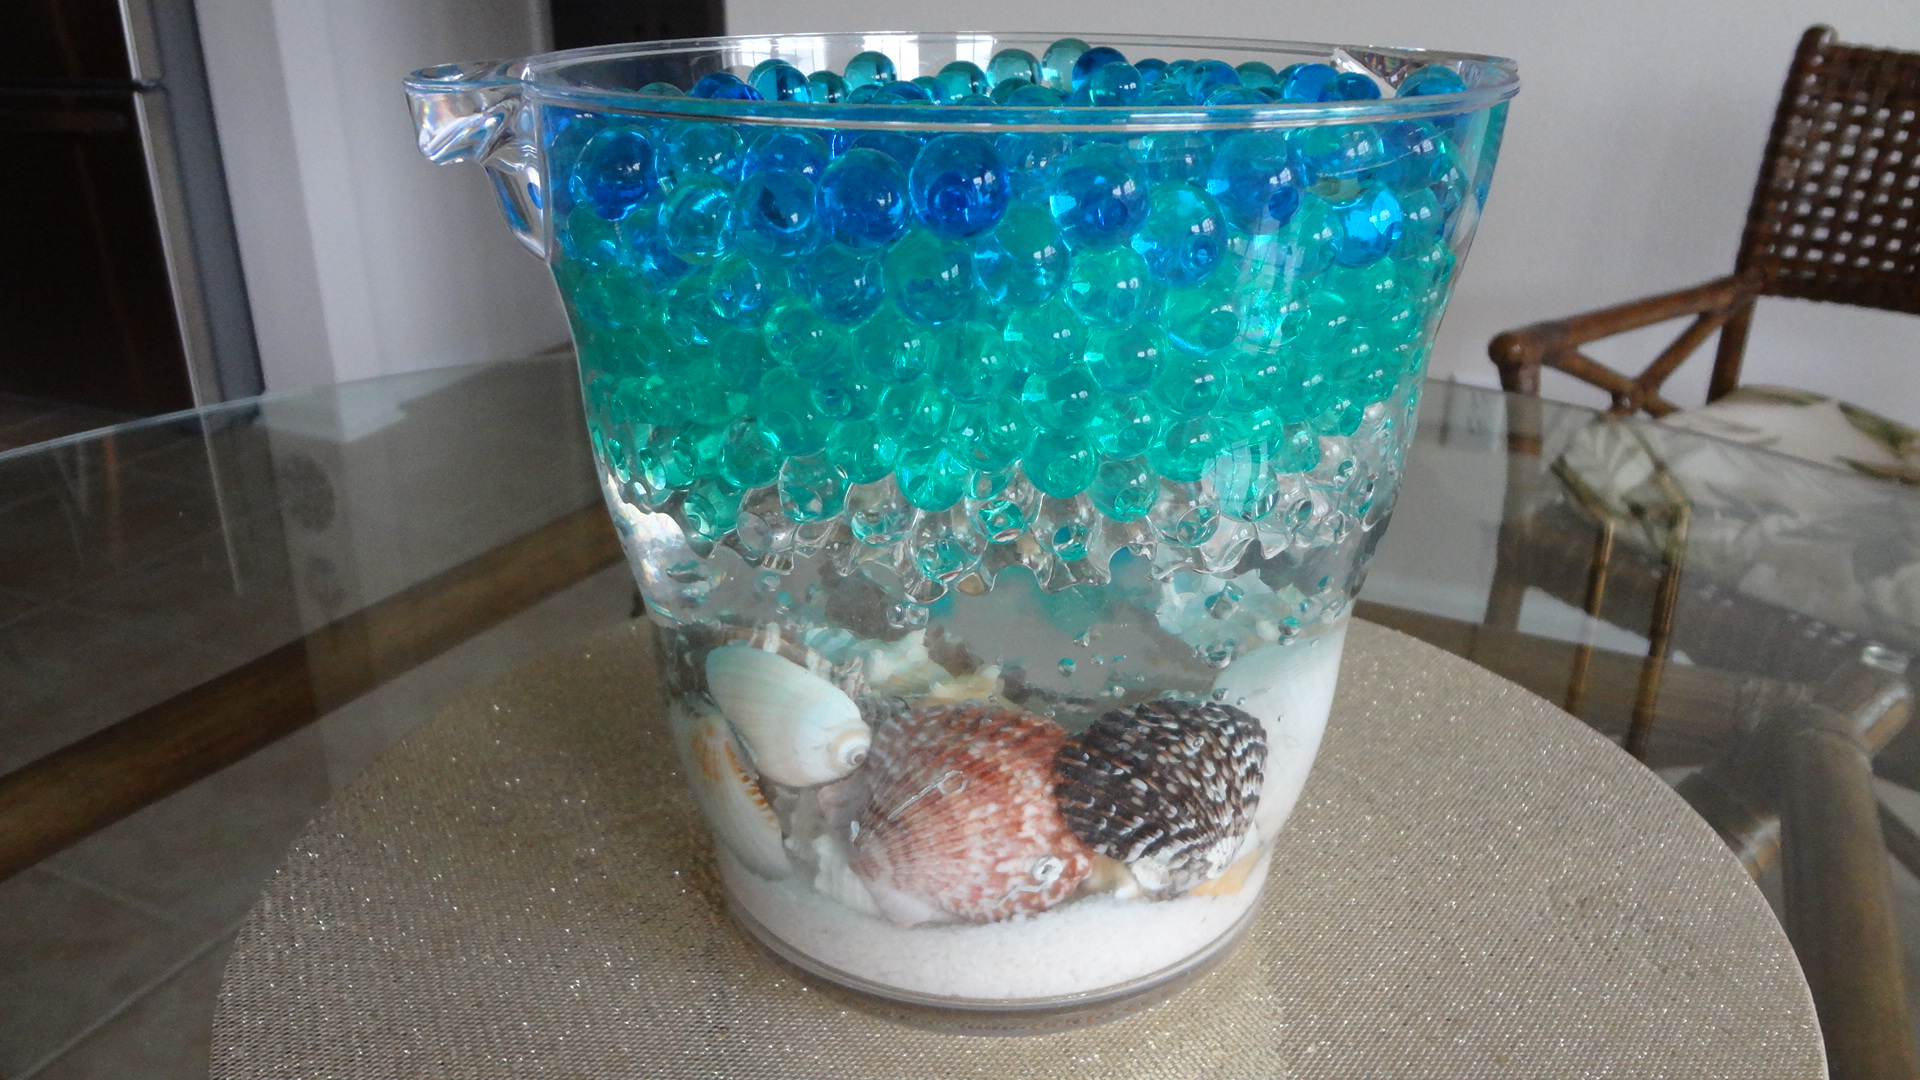 Water Beads Ideas - Centerpieces, Vases and other water bead ideas